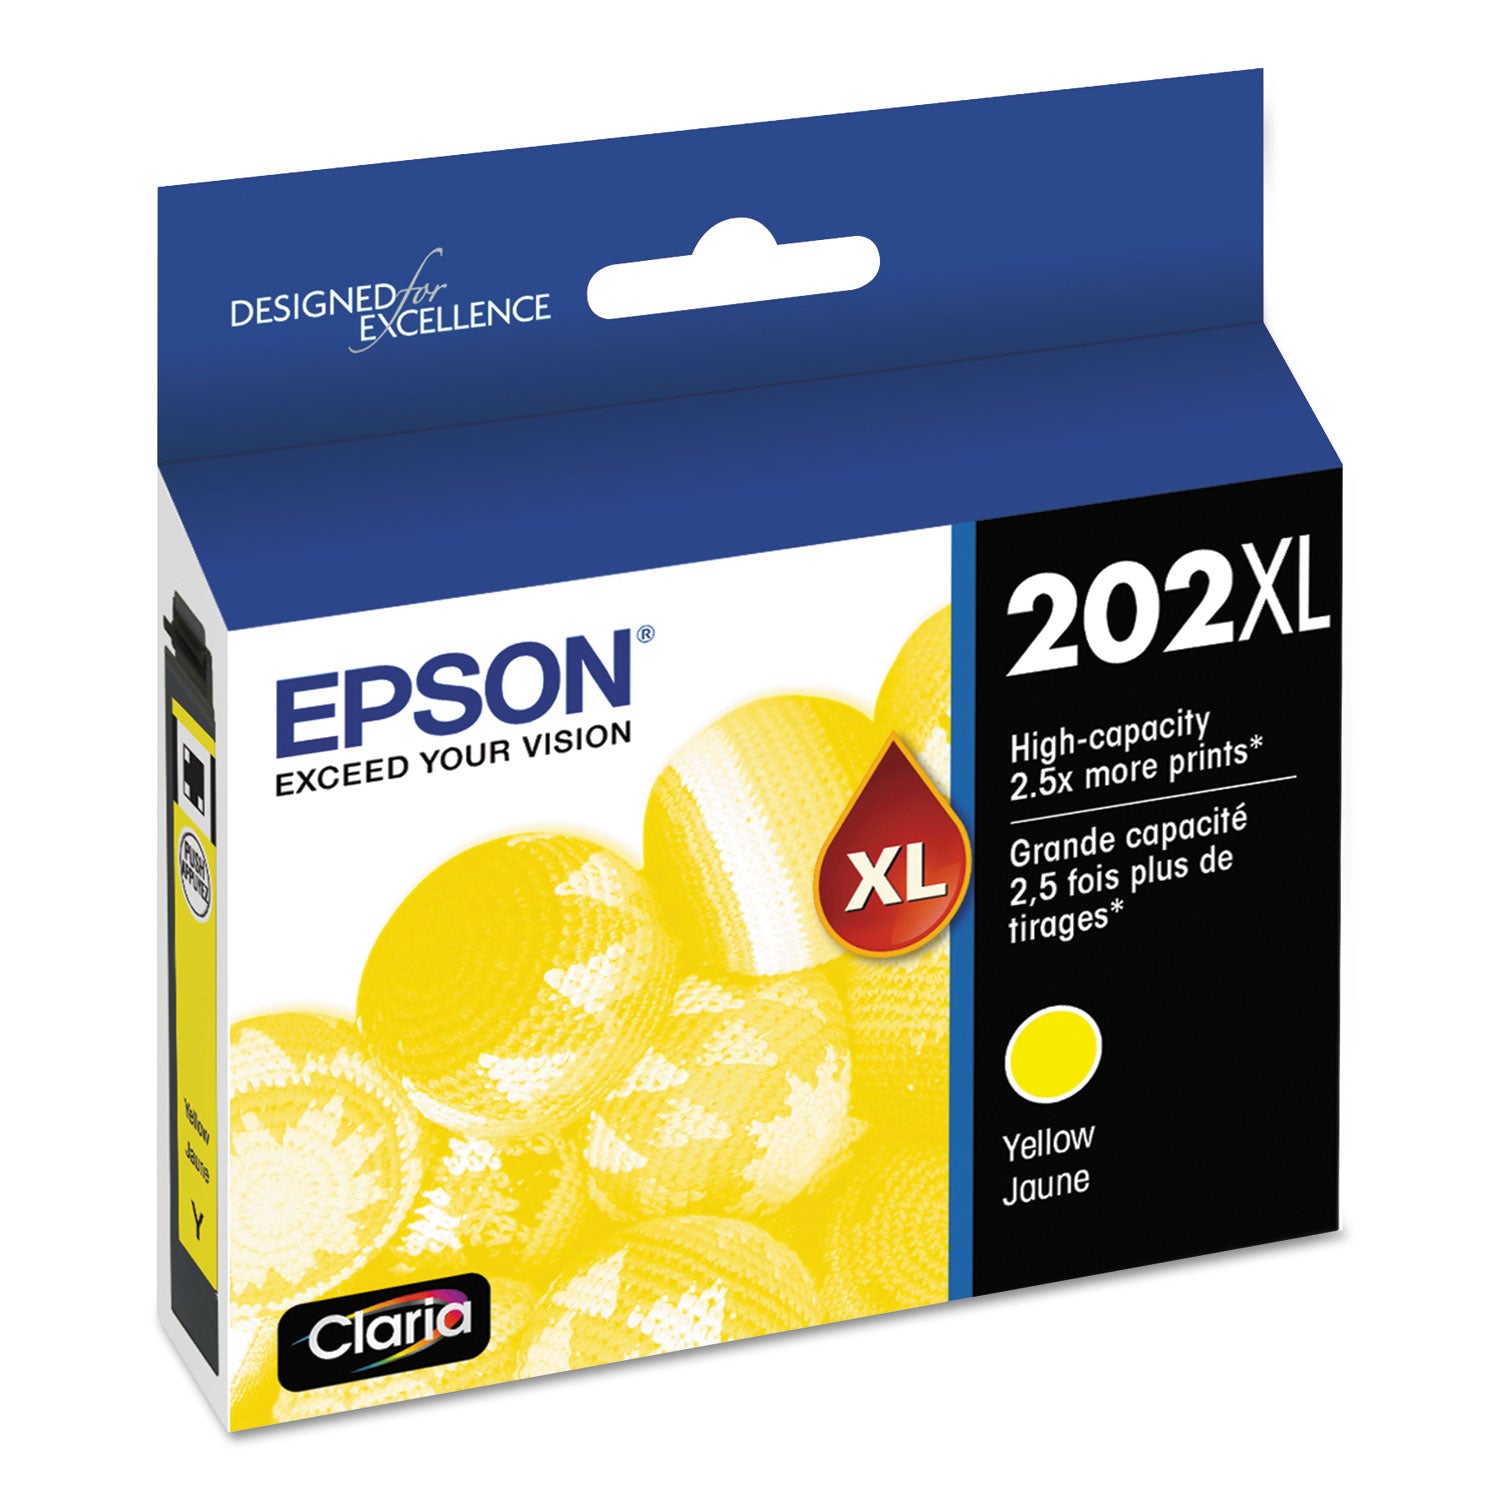 t202xl420-s-202xl-claria-high-yield-ink-470-page-yield-yellow_epst202xl420s - 2